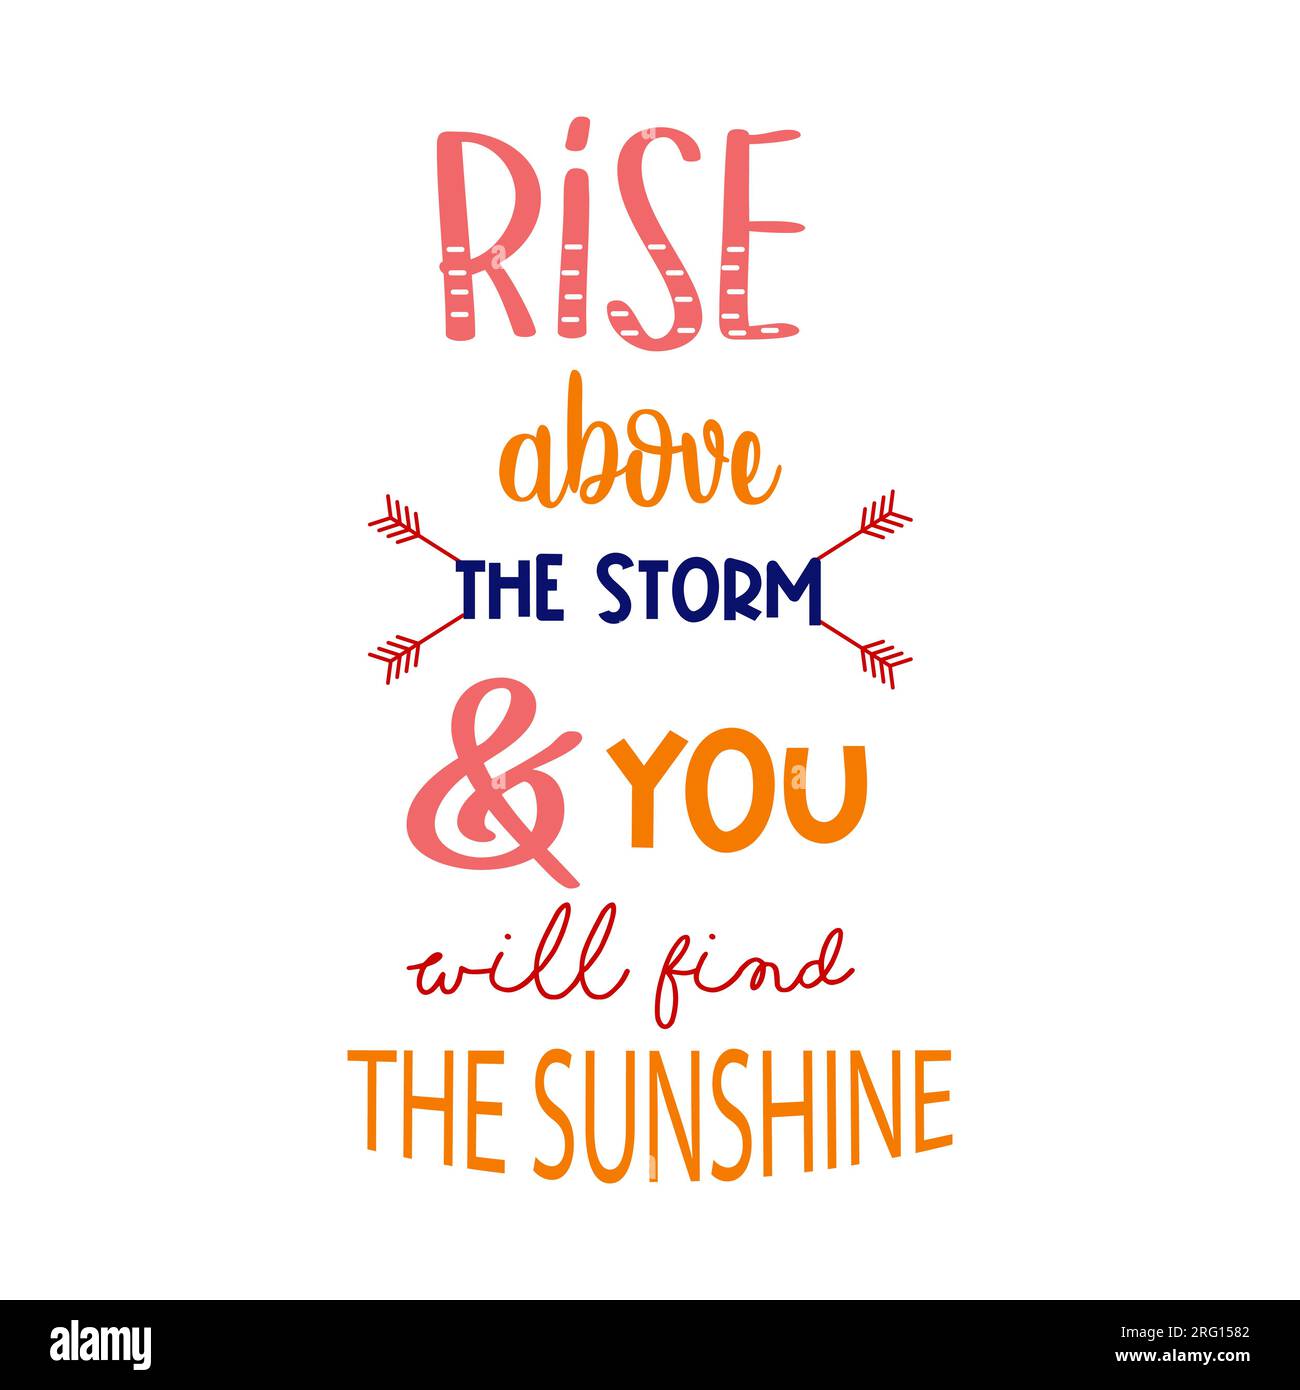 https://c8.alamy.com/comp/2RG1582/rise-above-the-storm-and-you-will-find-the-sunshine-inspirational-quotes-everyday-motivation-positive-saying-typography-design-text-2RG1582.jpg